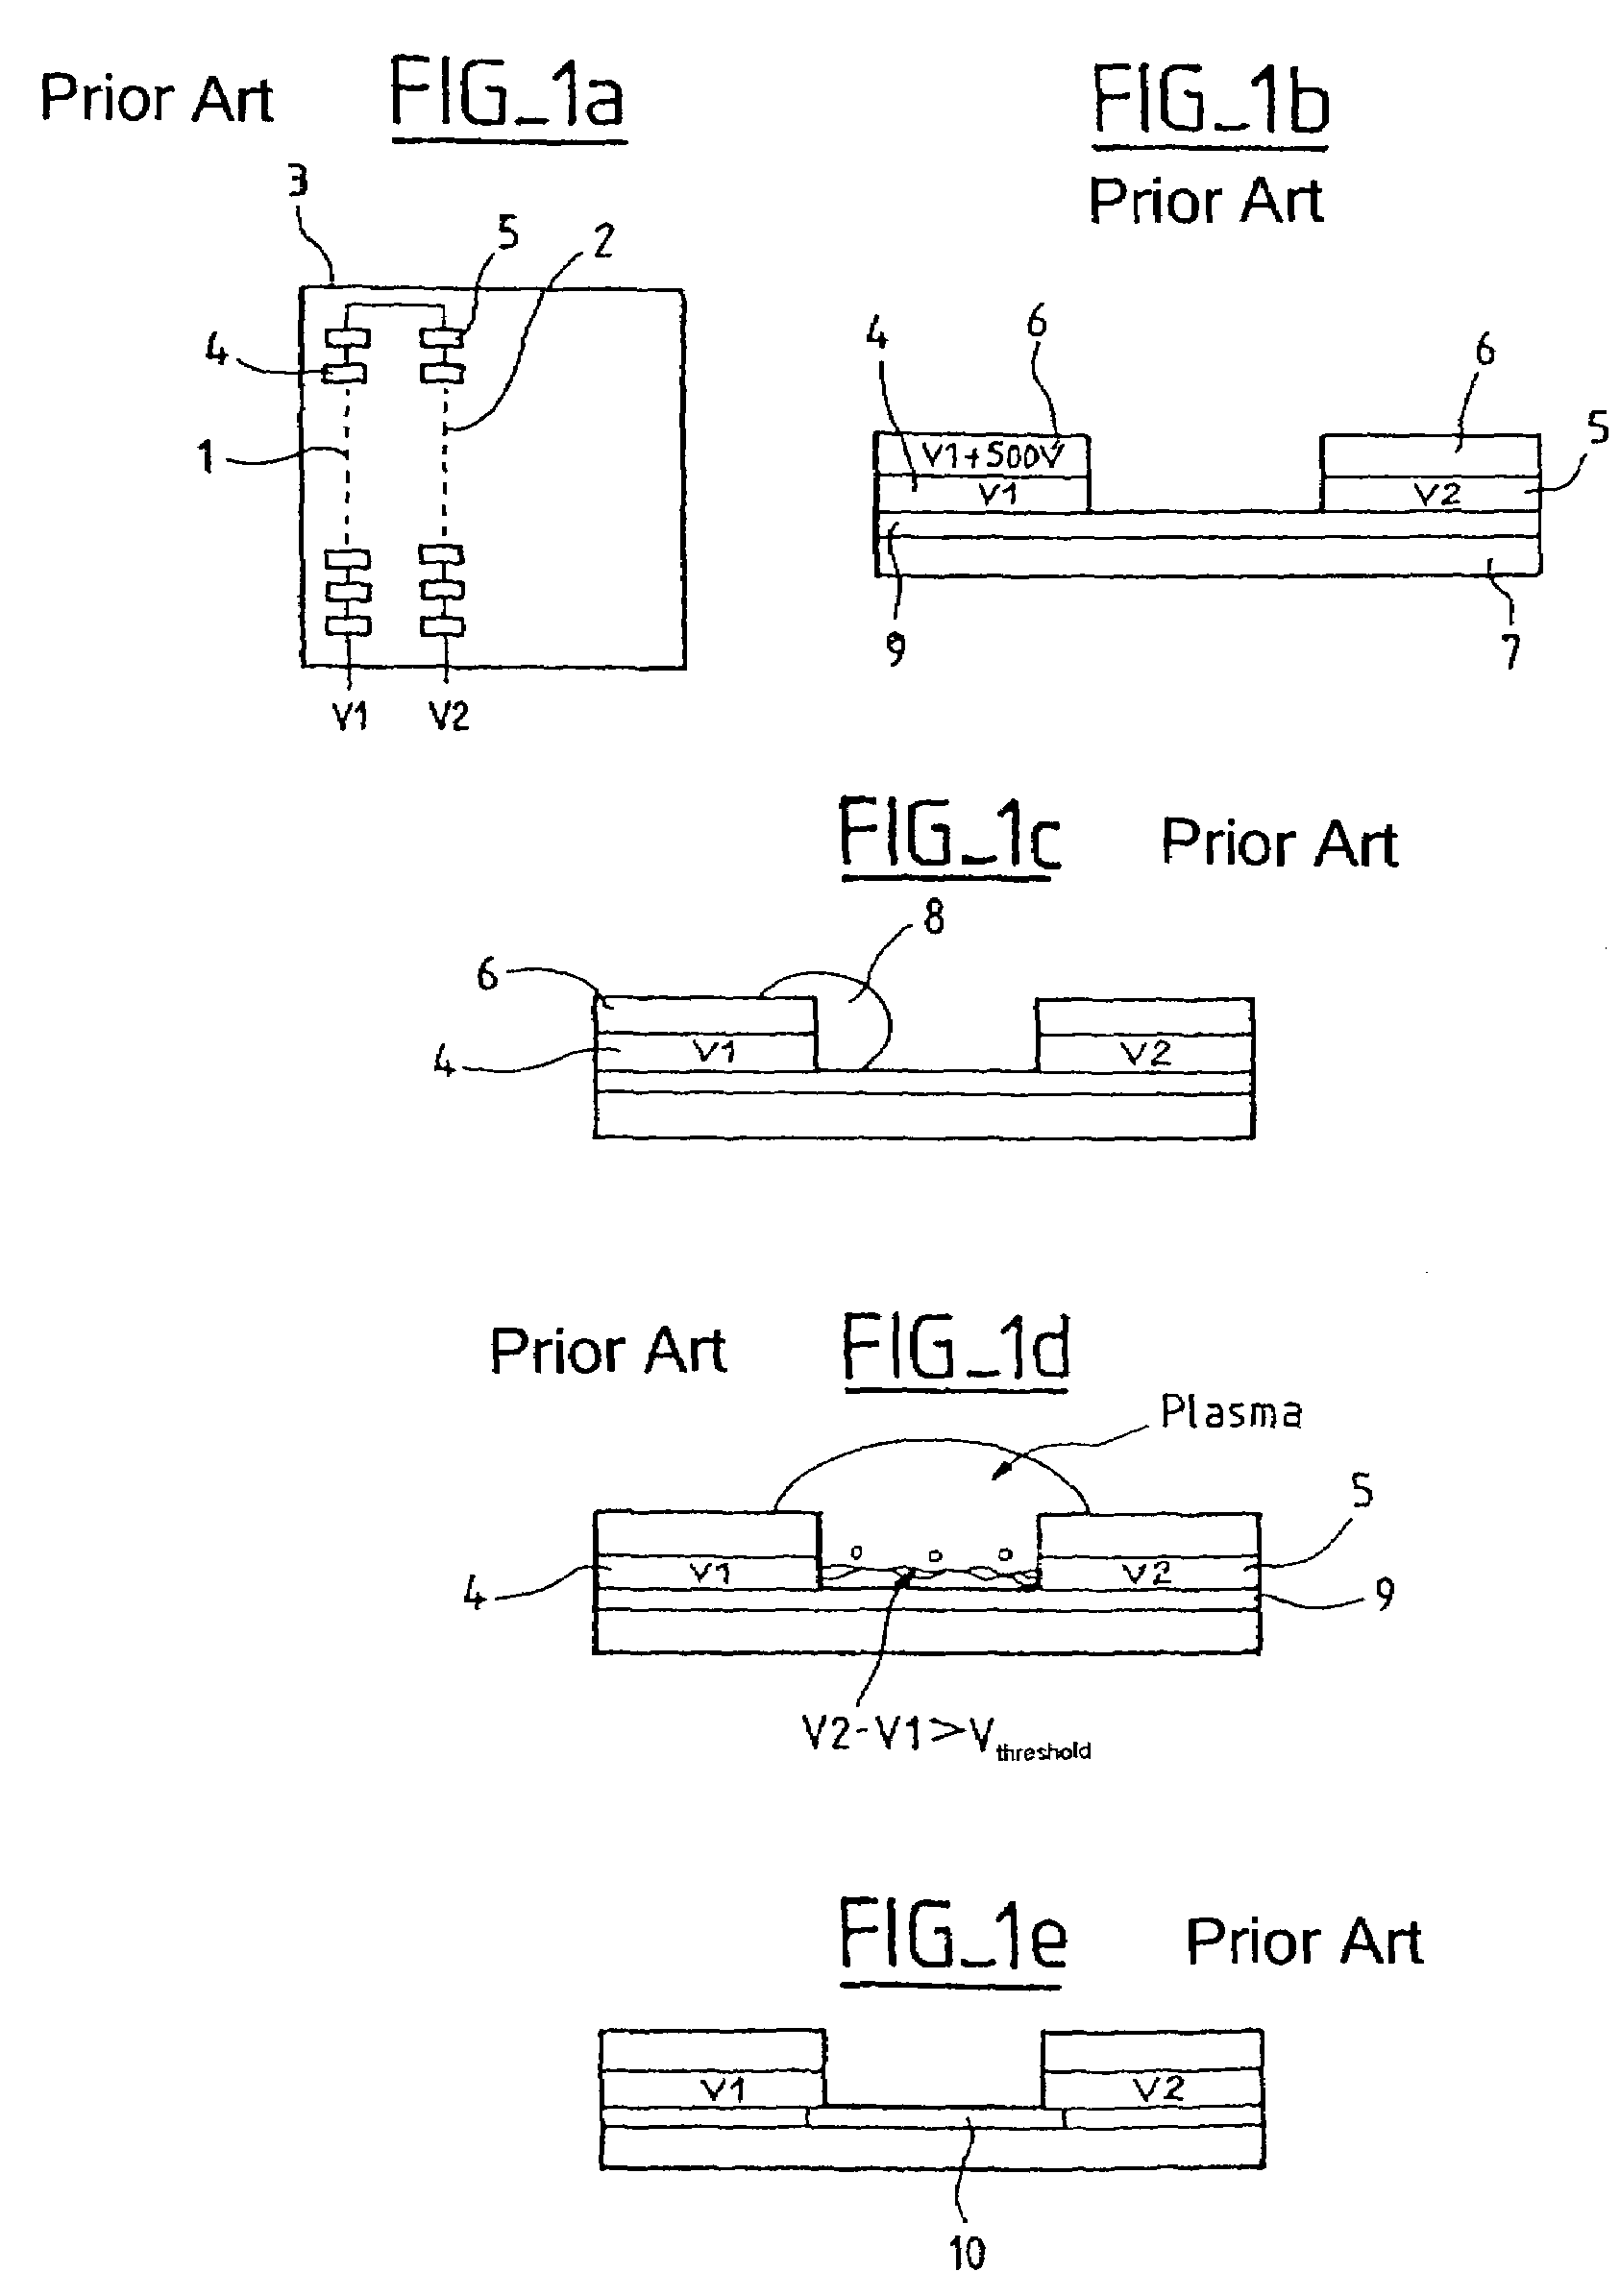 Solar energy concentrator device for spacecraft and a solar generator panel